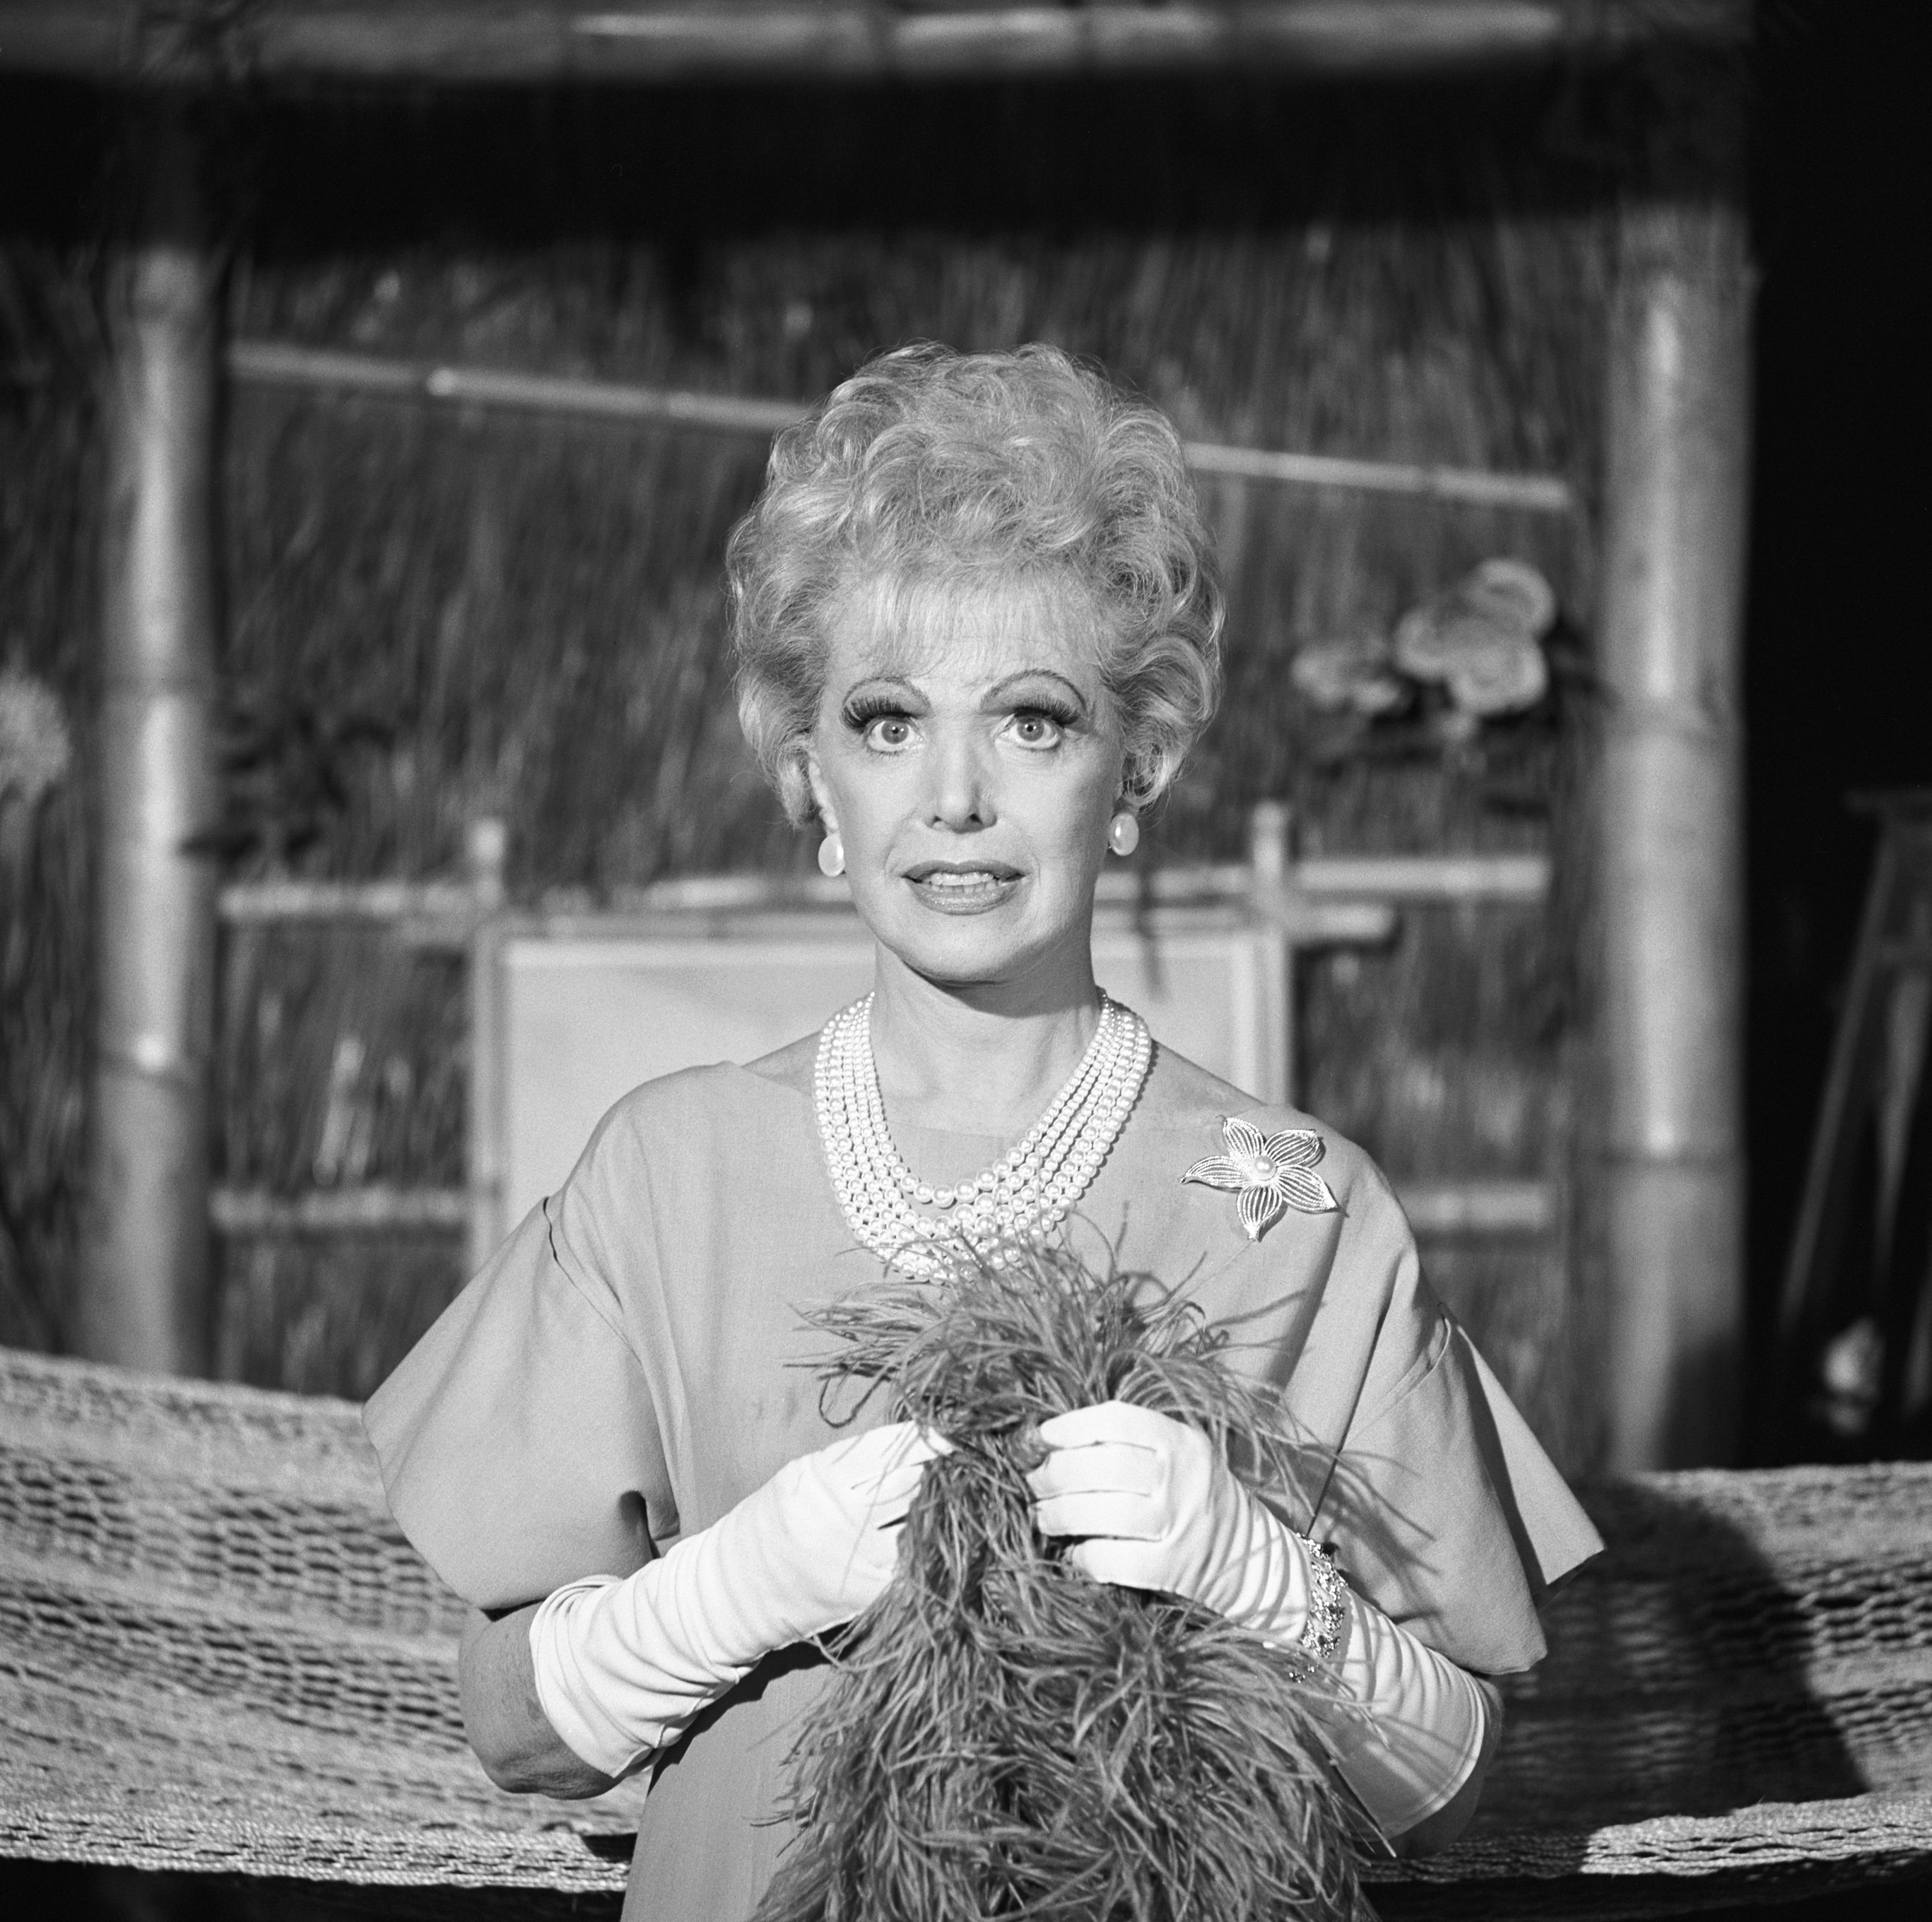 Natalie Schafer as Mrs. Lovey Howell on the set of the episode: "Hair Today, Gone Tomorrow" for the TV series "Gilligan's Island" pictured on May 15, 1966.  | Source: Getty Images